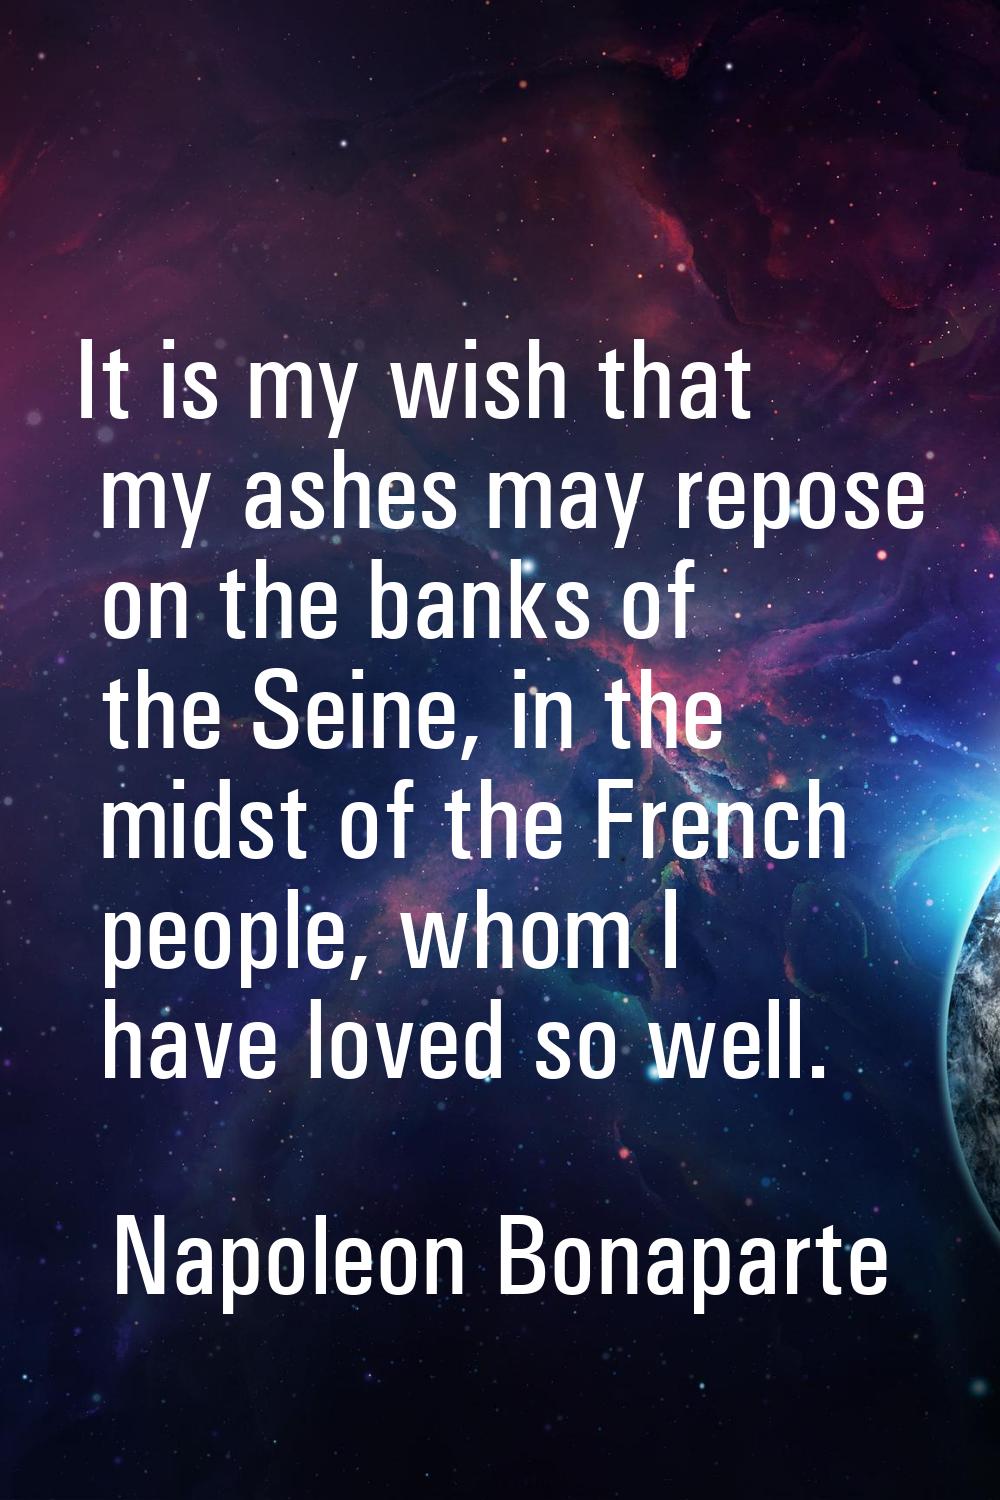 It is my wish that my ashes may repose on the banks of the Seine, in the midst of the French people